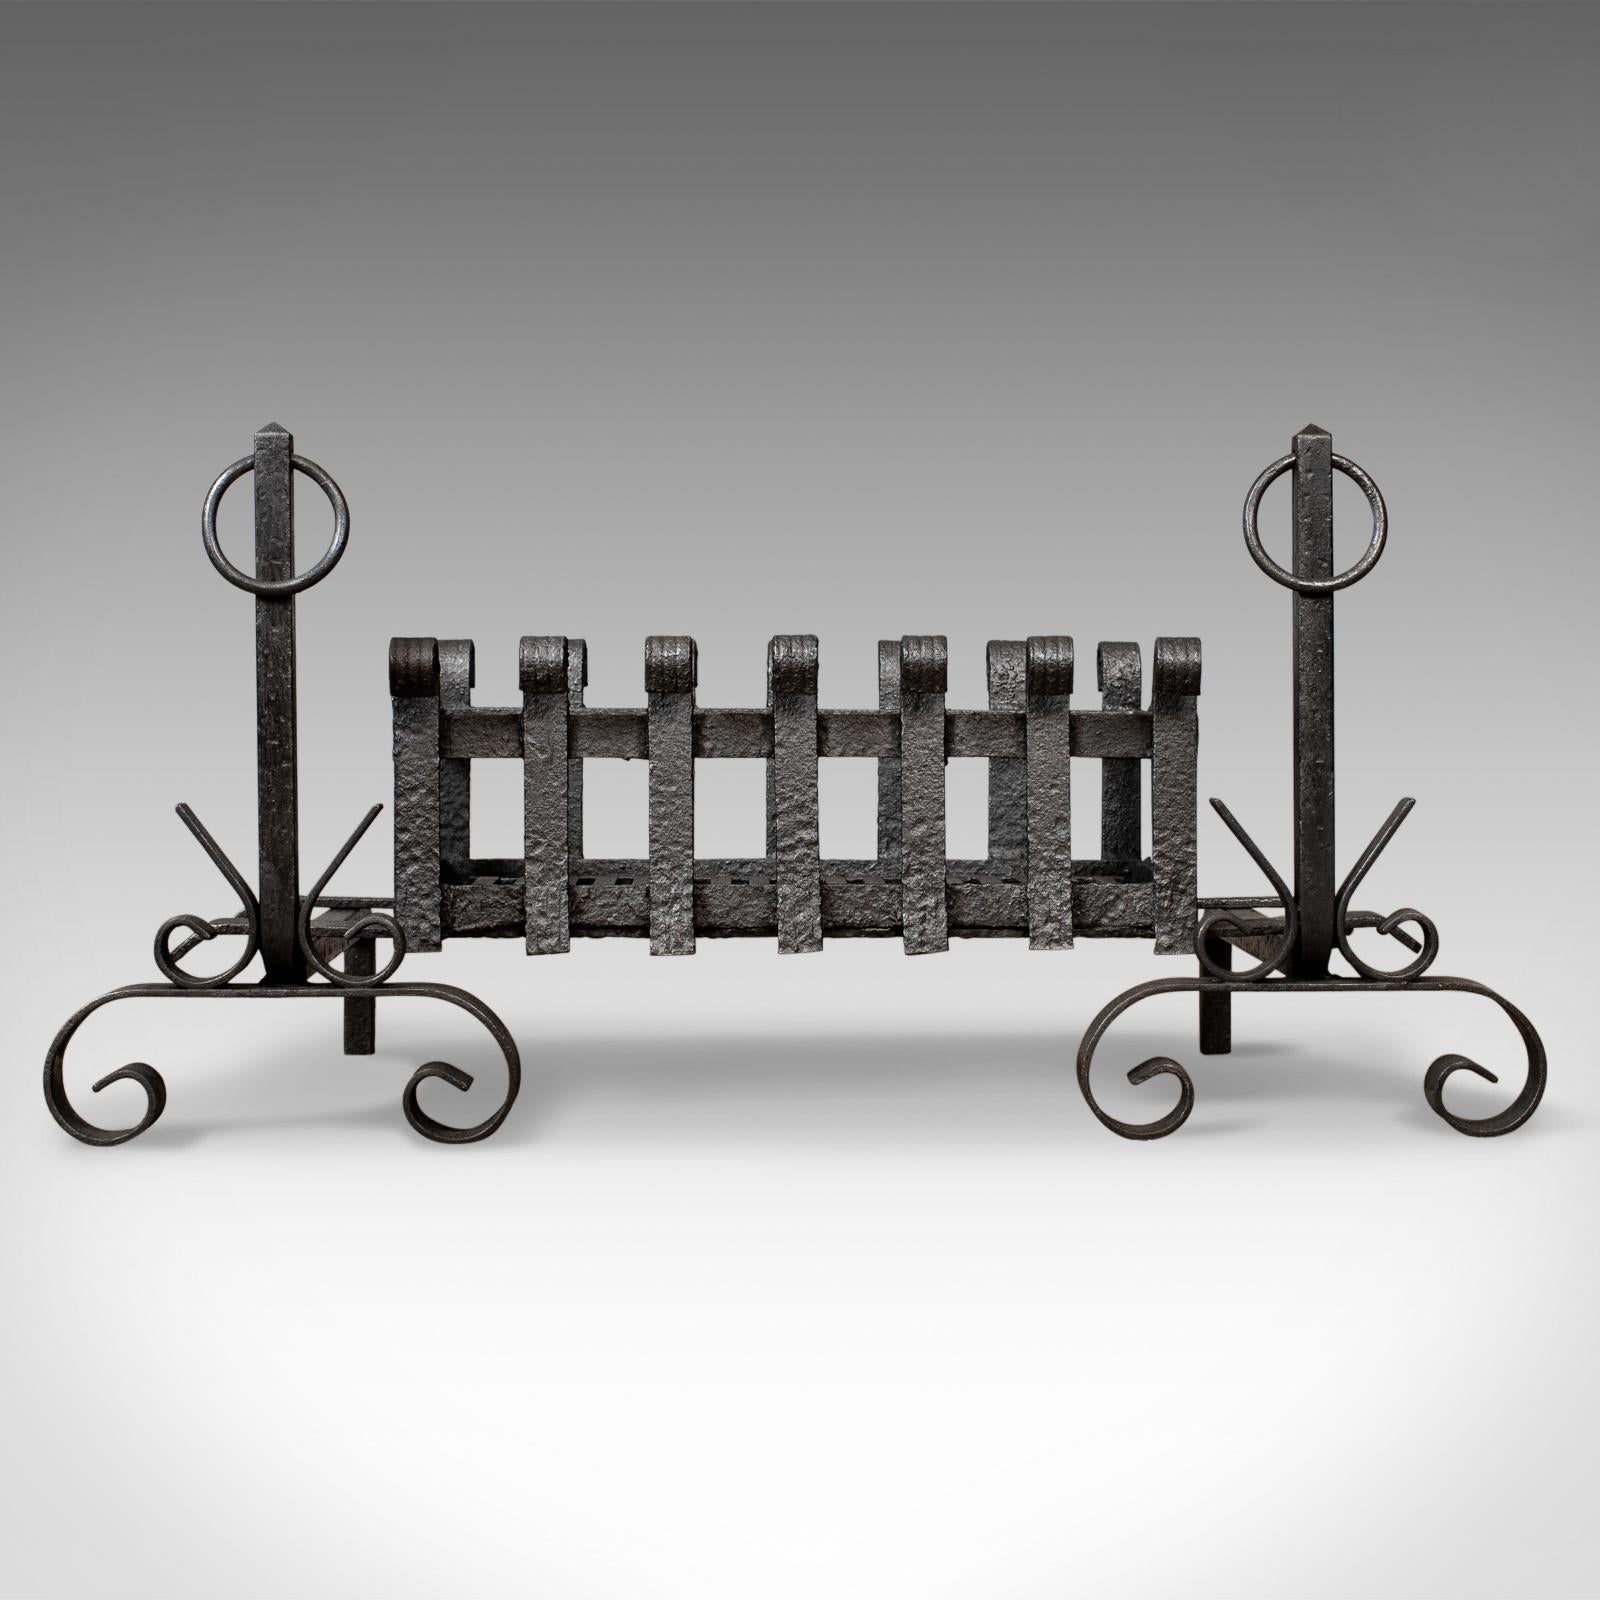 This is an antique fire basket and andirons, or fire dogs, an English, Victorian fireplace accessory with a removable iron grate dating to the early 20th century, circa 1900.

A fire basket raised on andirons presented in very good condition
A